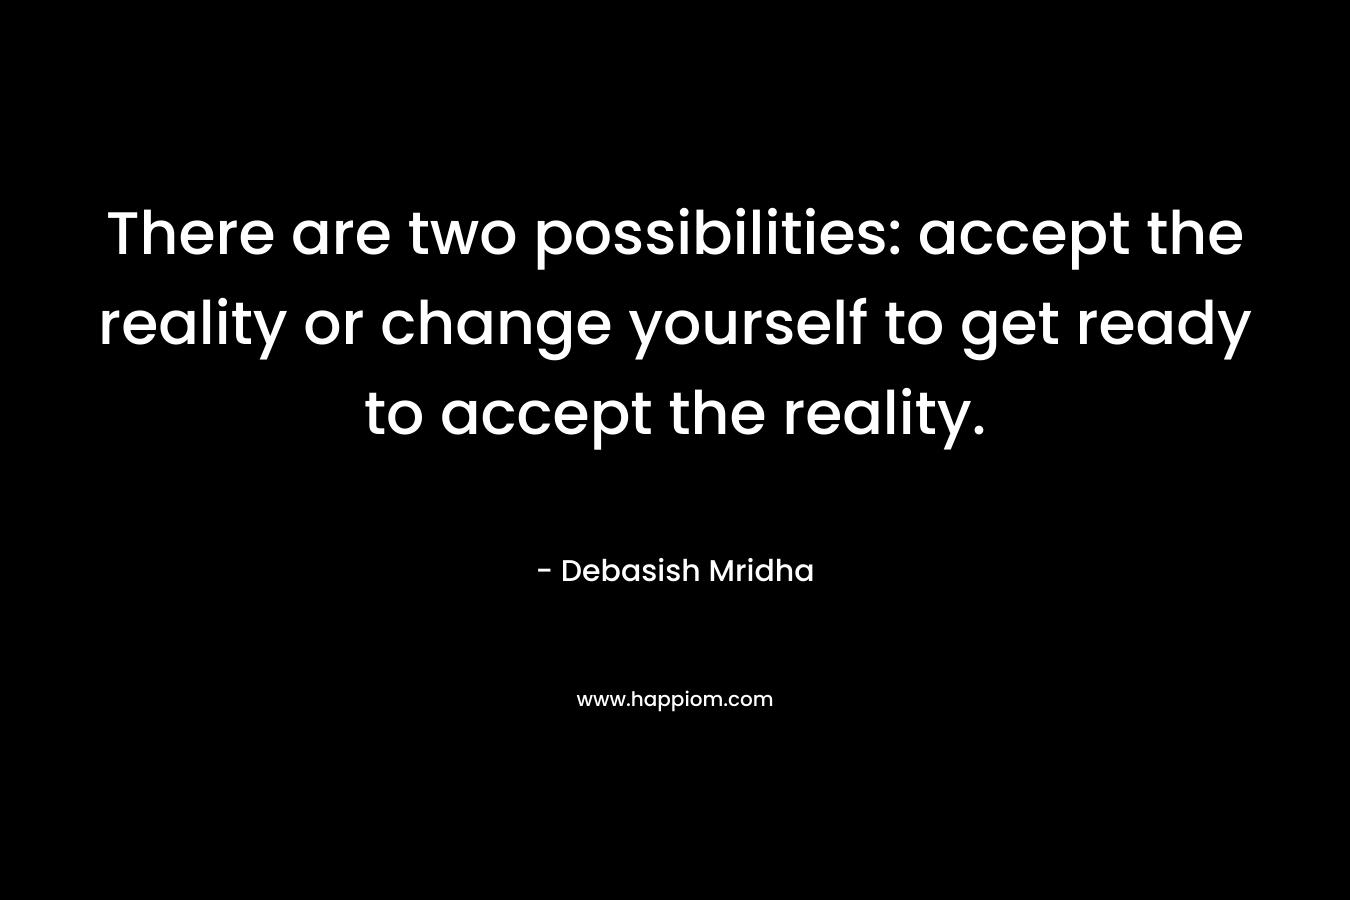 There are two possibilities: accept the reality or change yourself to get ready to accept the reality.